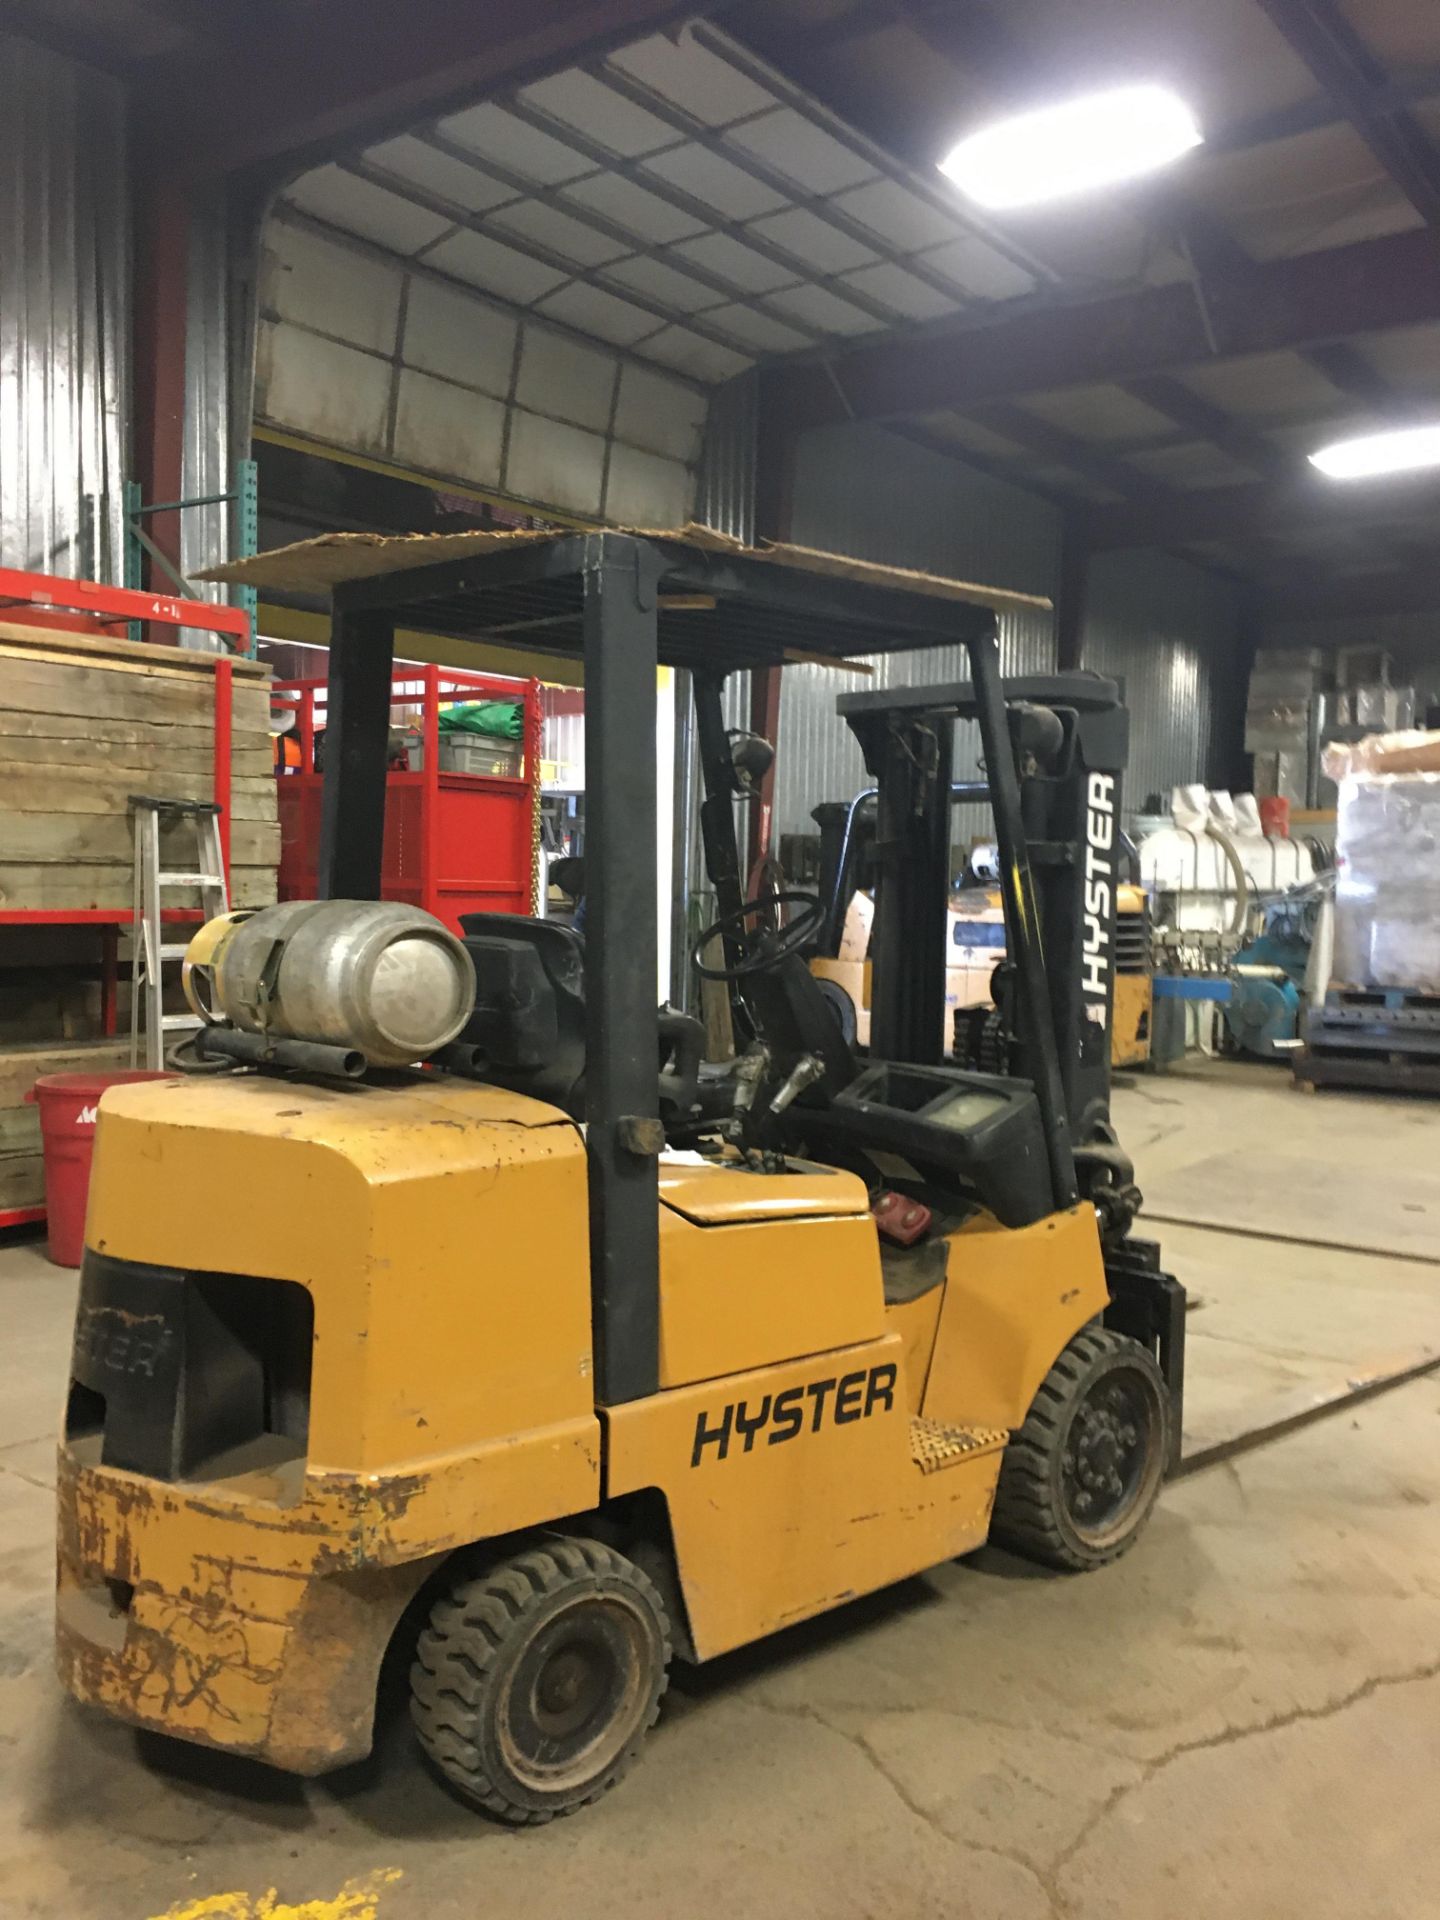 HYSTER PROPANE FORKLIFT, 8000 LBS CAP. (SIDESHIFT NOT FUNCTIONAL, NEEDS A REEL AND 2 HOSES) - Bild 2 aus 4